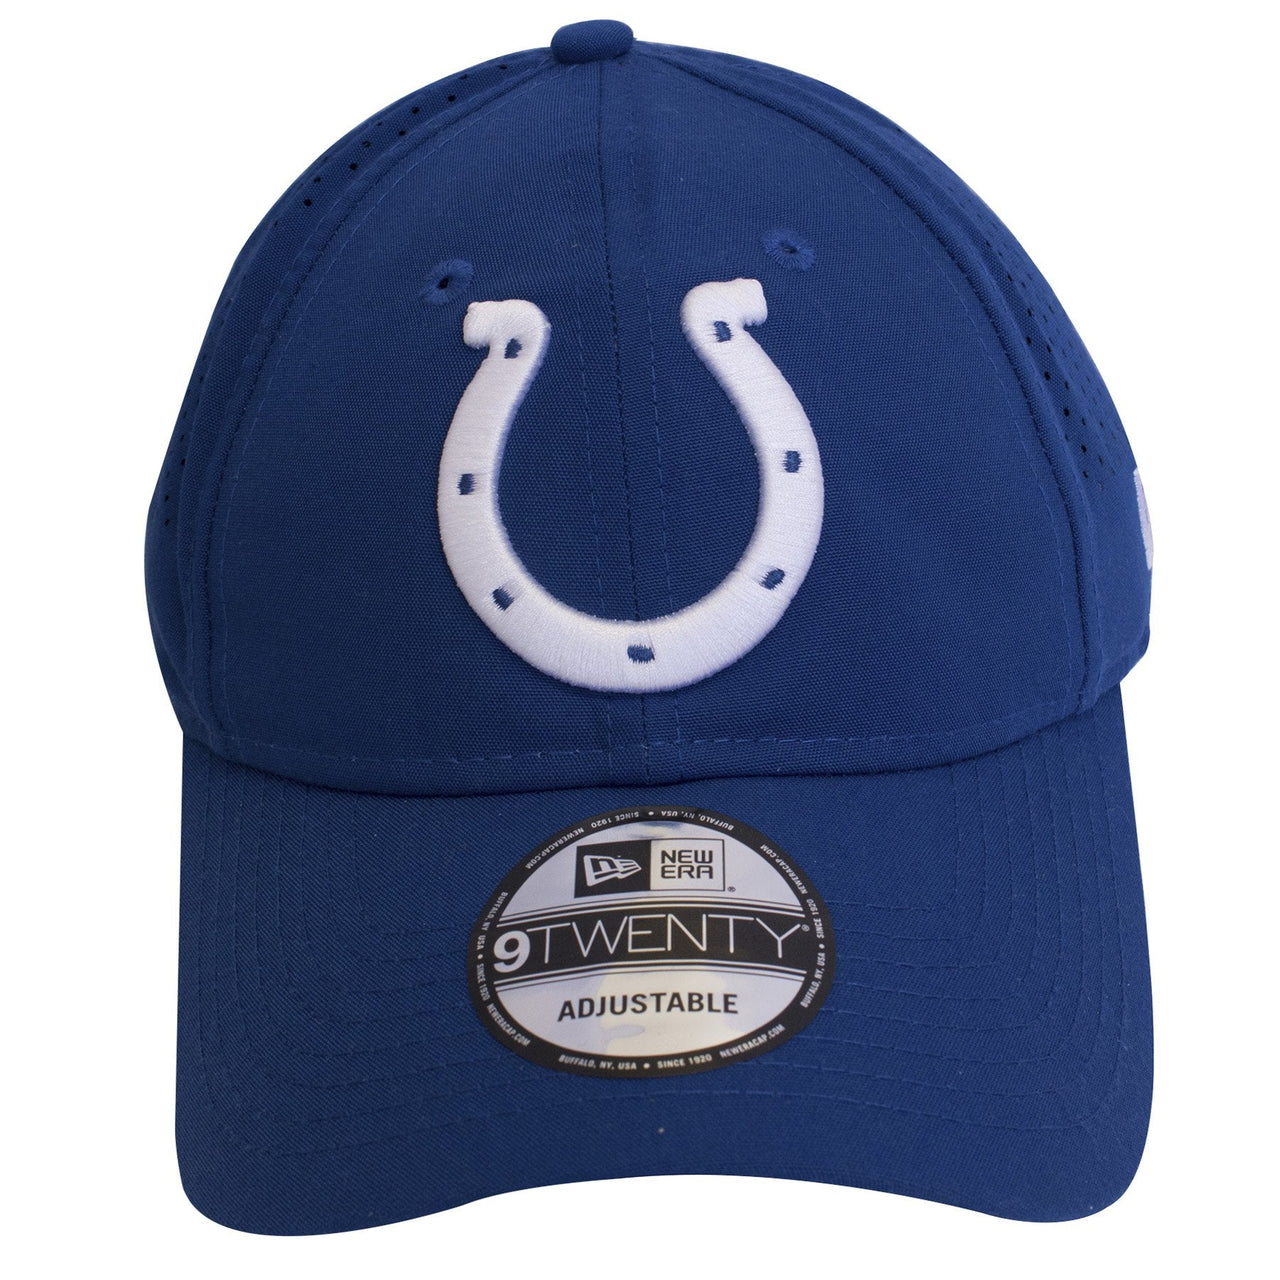 Large Indianapolis Colts logo heavily embroidered on the front of a royal blue dad hat.